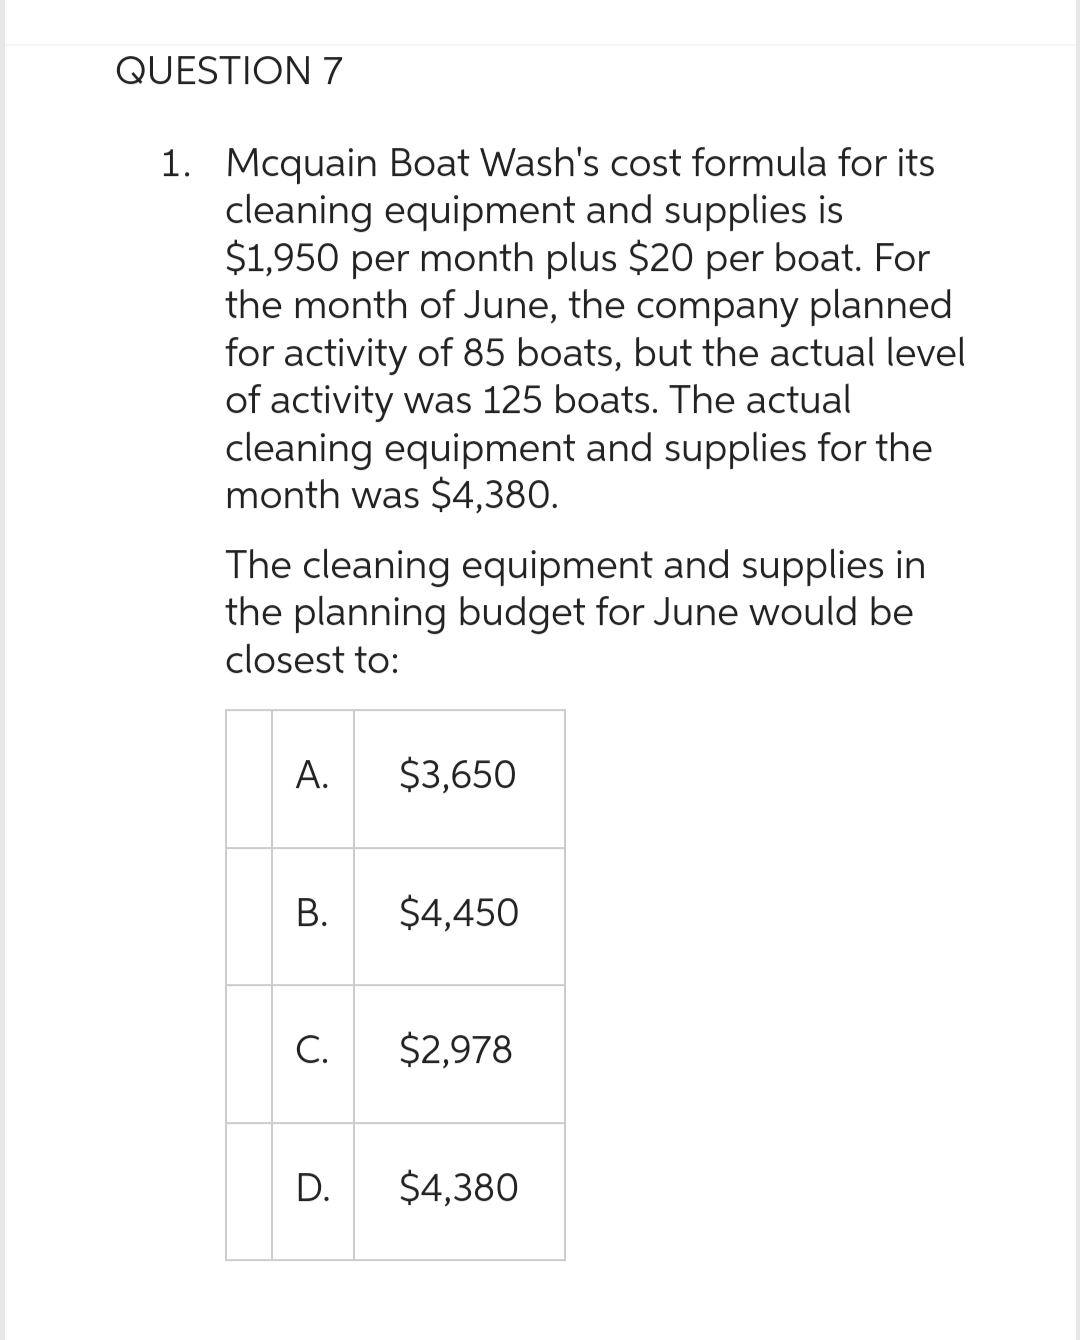 QUESTION 7
1. Mcquain Boat Wash's cost formula for its
cleaning equipment and supplies is
$1,950 per month plus $20 per boat. For
the month of June, the company planned
for activity of 85 boats, but the actual level
of activity was 125 boats. The actual
cleaning equipment and supplies for the
month was $4,380.
The cleaning equipment and supplies in
the planning budget for June would be
closest to:
A.
B.
C.
D.
$3,650
$4,450
$2,978
$4,380